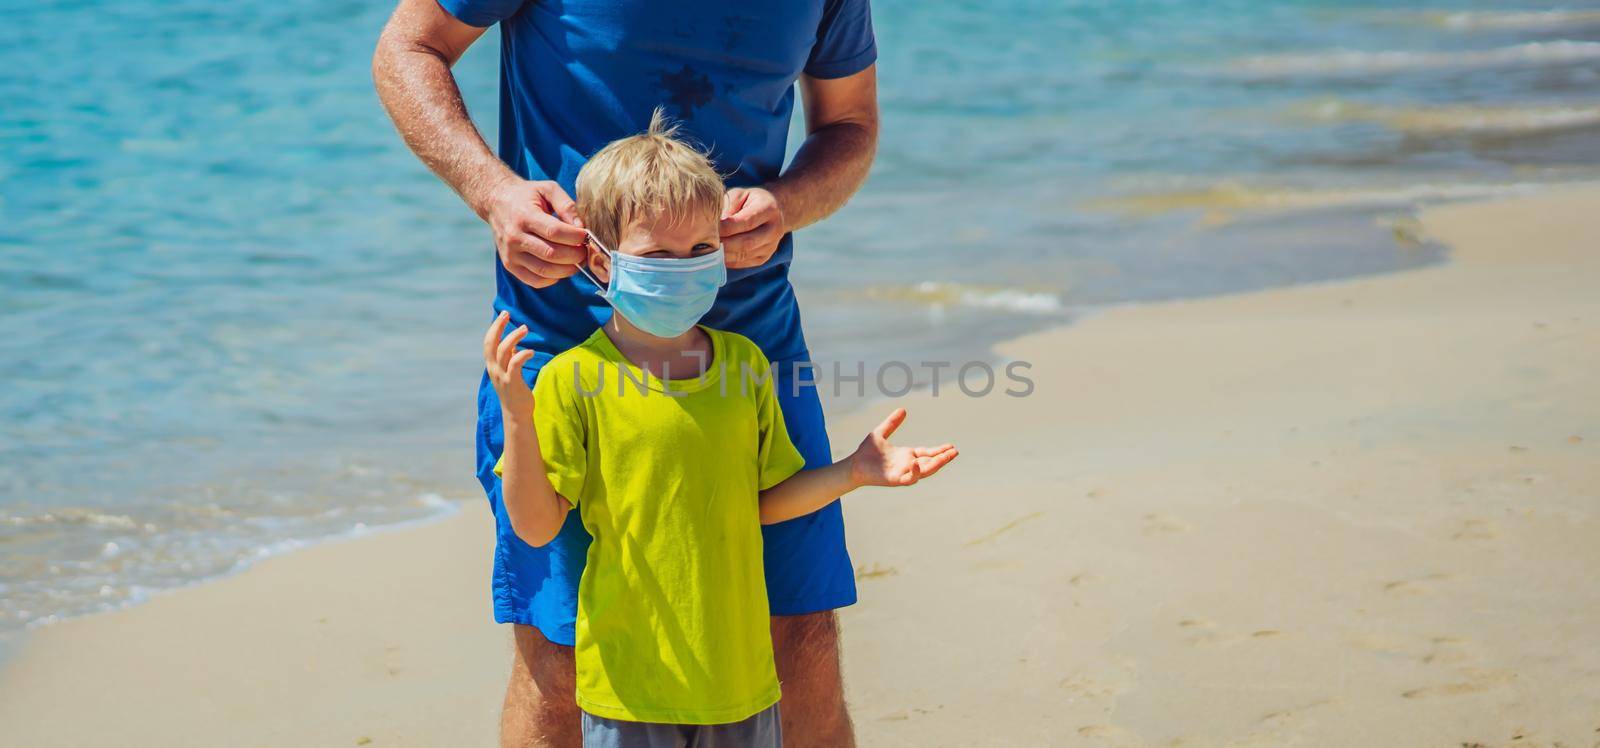 Normal reality COVID pandemic. Father ask boy put on mask protect coronavirus, son refuses does not want to constantly wear it everywhere, get tired of mask, walk nature sea beach forest park sun day.